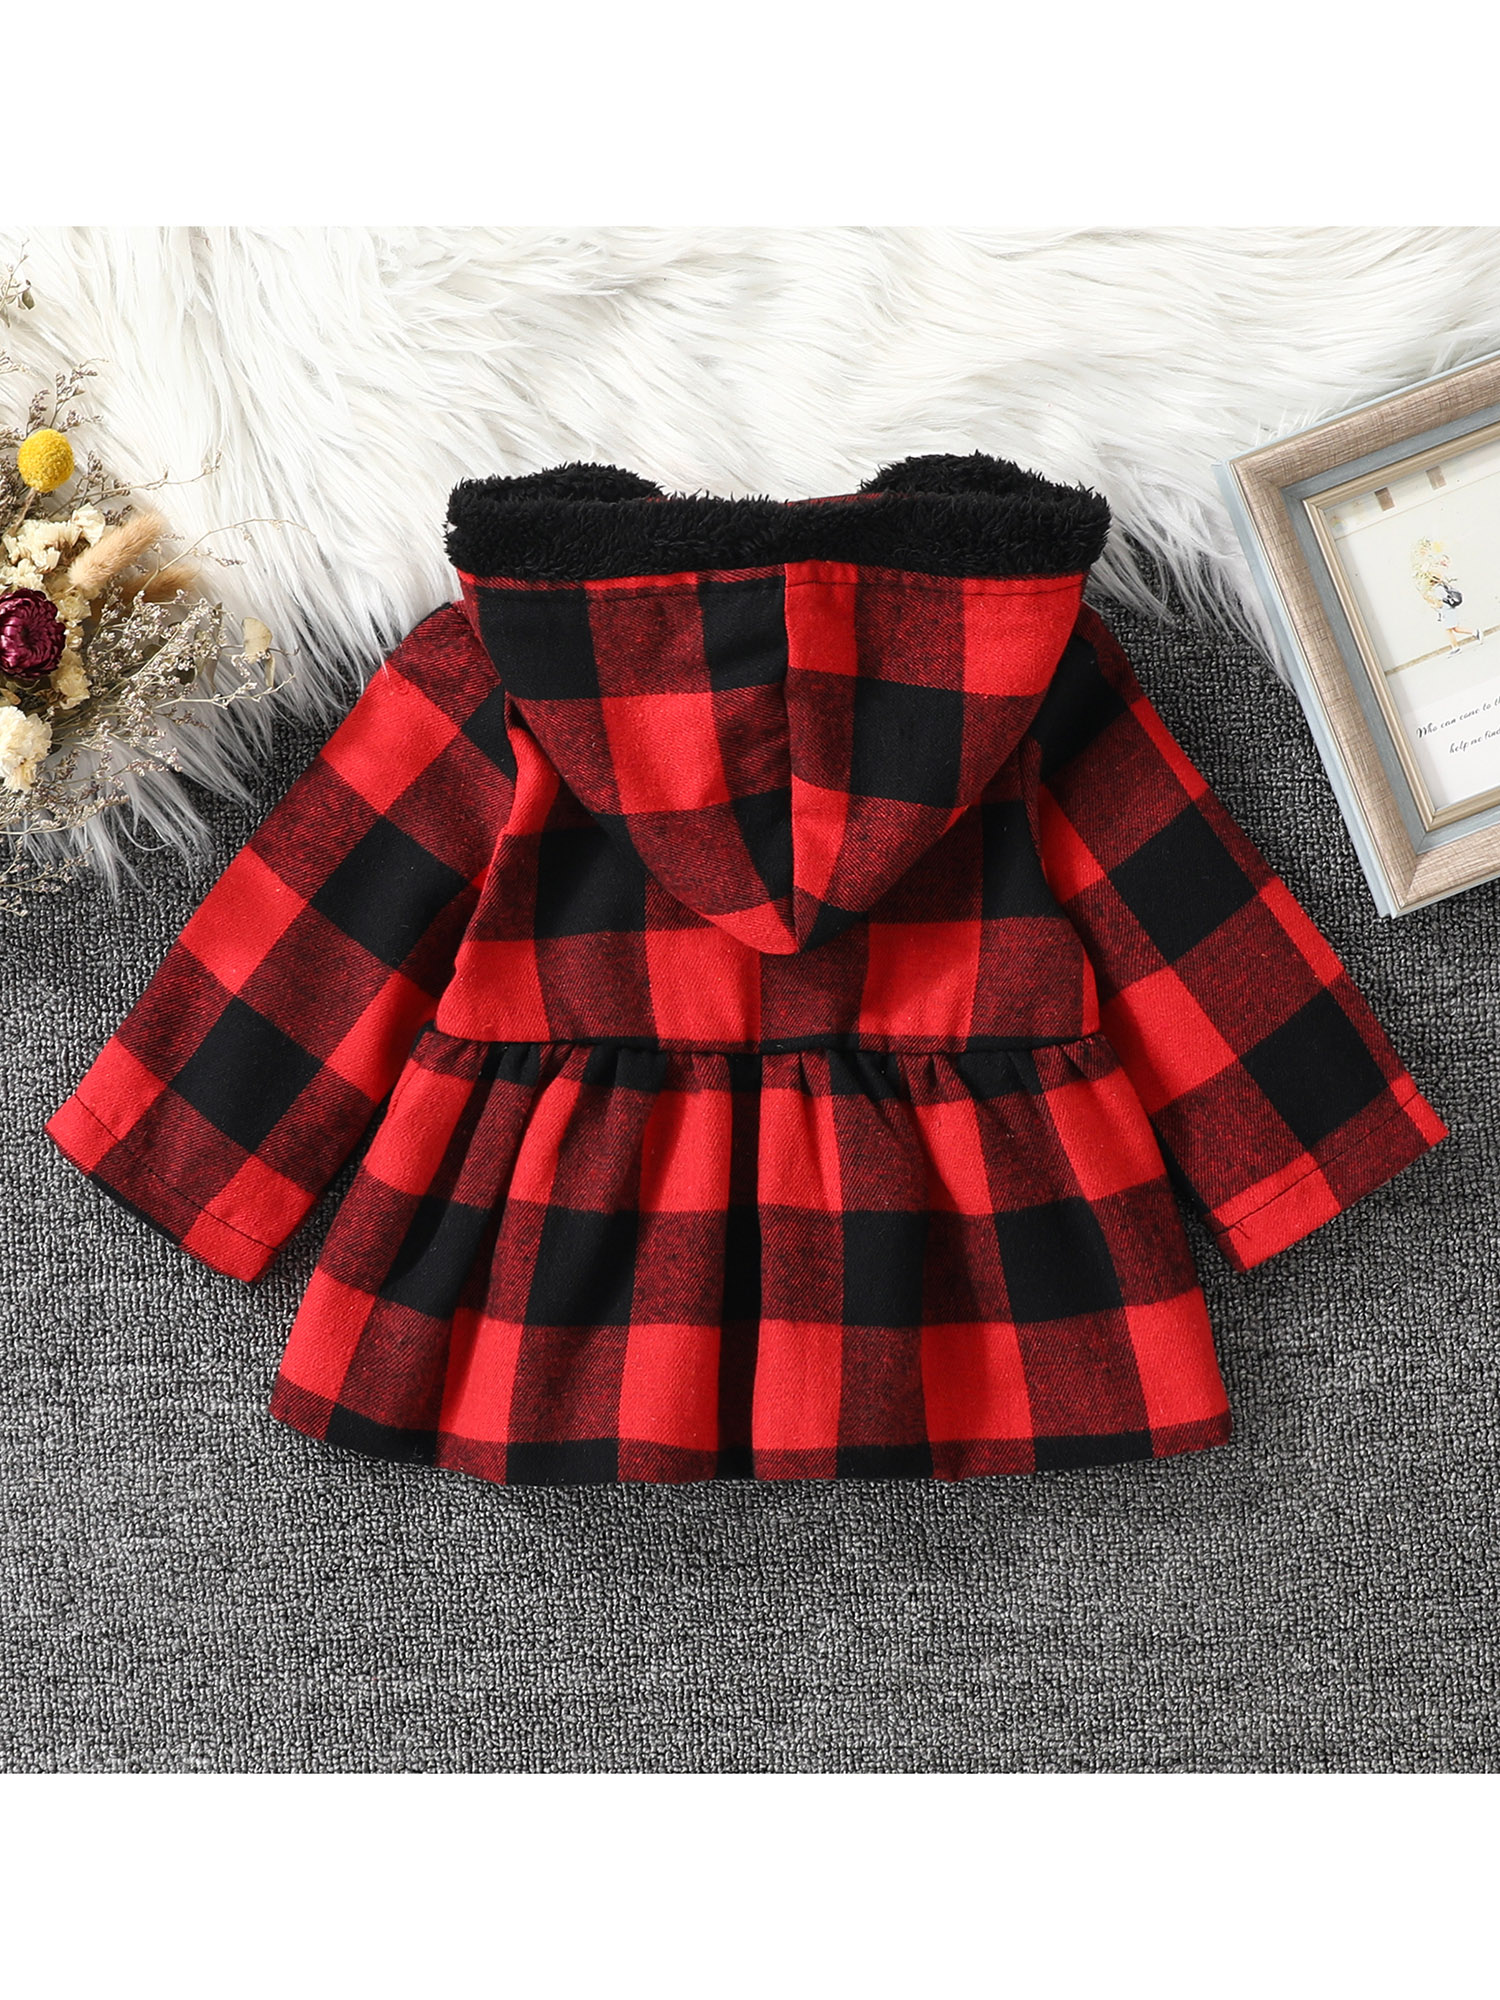 Gwiyeopda Toddler Baby Girls Hooded Coat Plaid Print Long Sleeves Horn Button Closure Autumn Winter A-Line Jacket - image 3 of 6